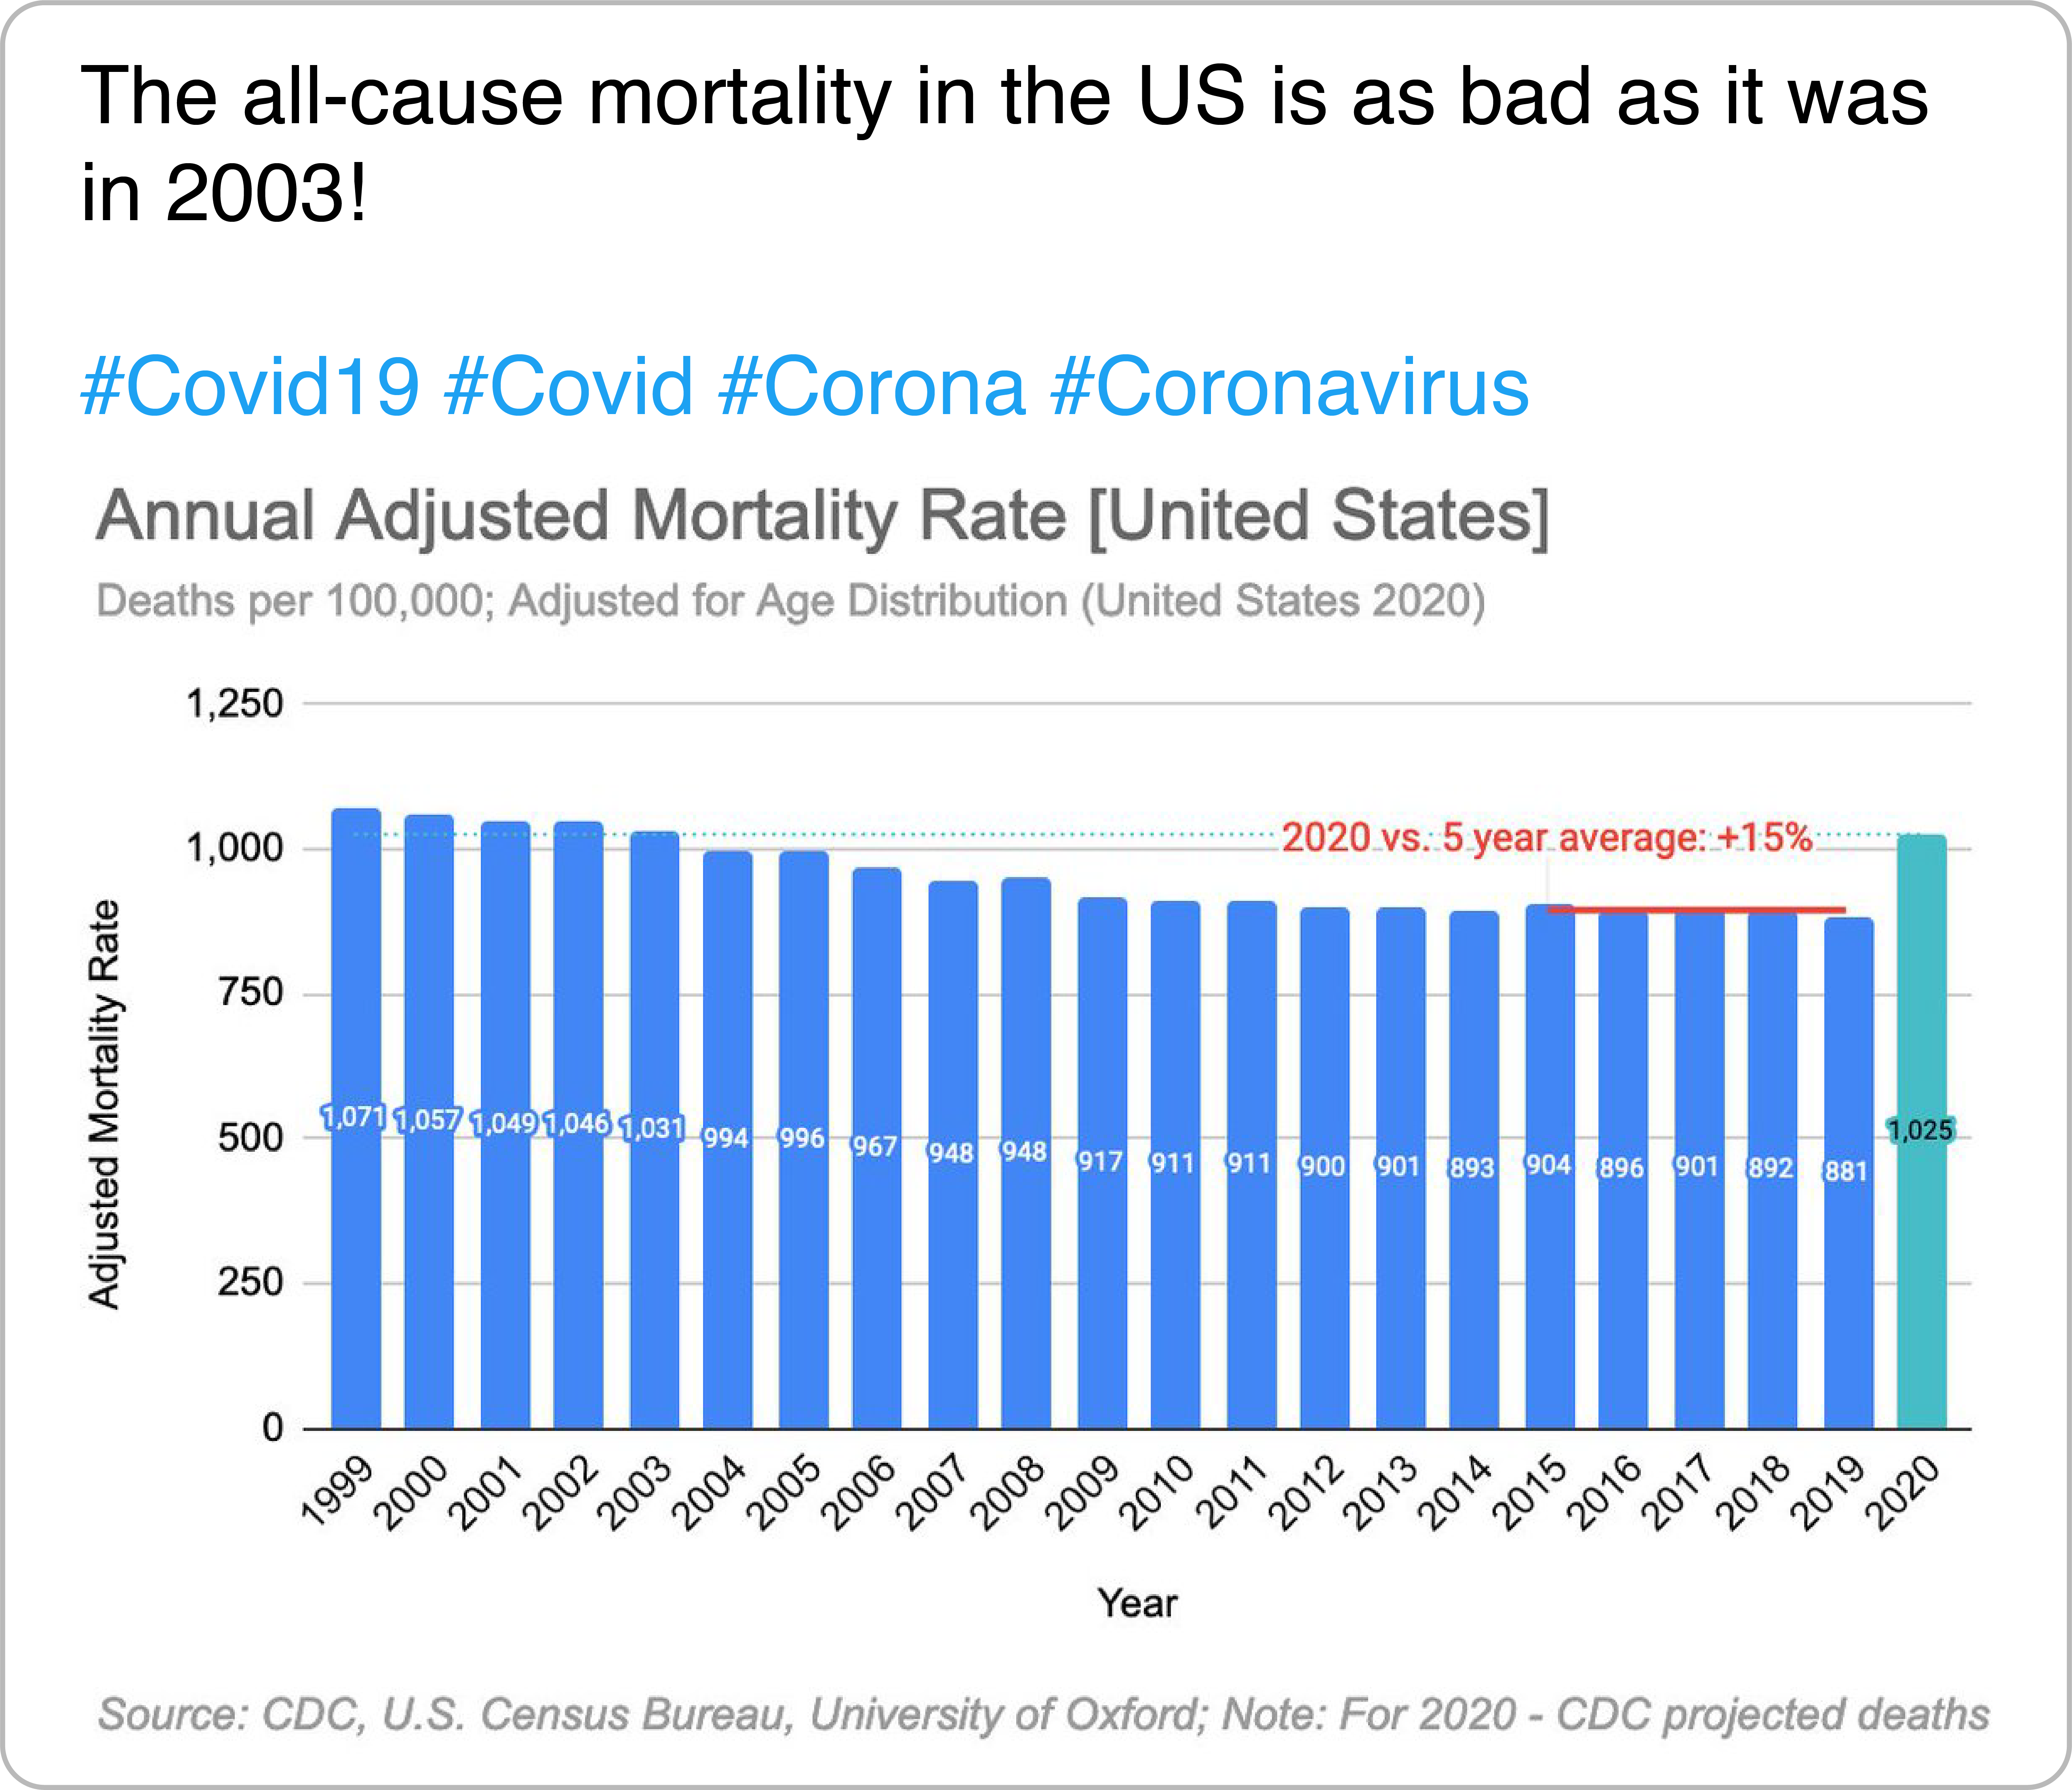 Screenshot of a tweet.  
The caption says: The all-cause mortality in the US is as bad as it was in 2003. The attached chart is a bar chart of annual mortality rate in the US between 1999 and 2020, with an annotation highlighting that the 2020 value is 15% higher than previous five year average.
